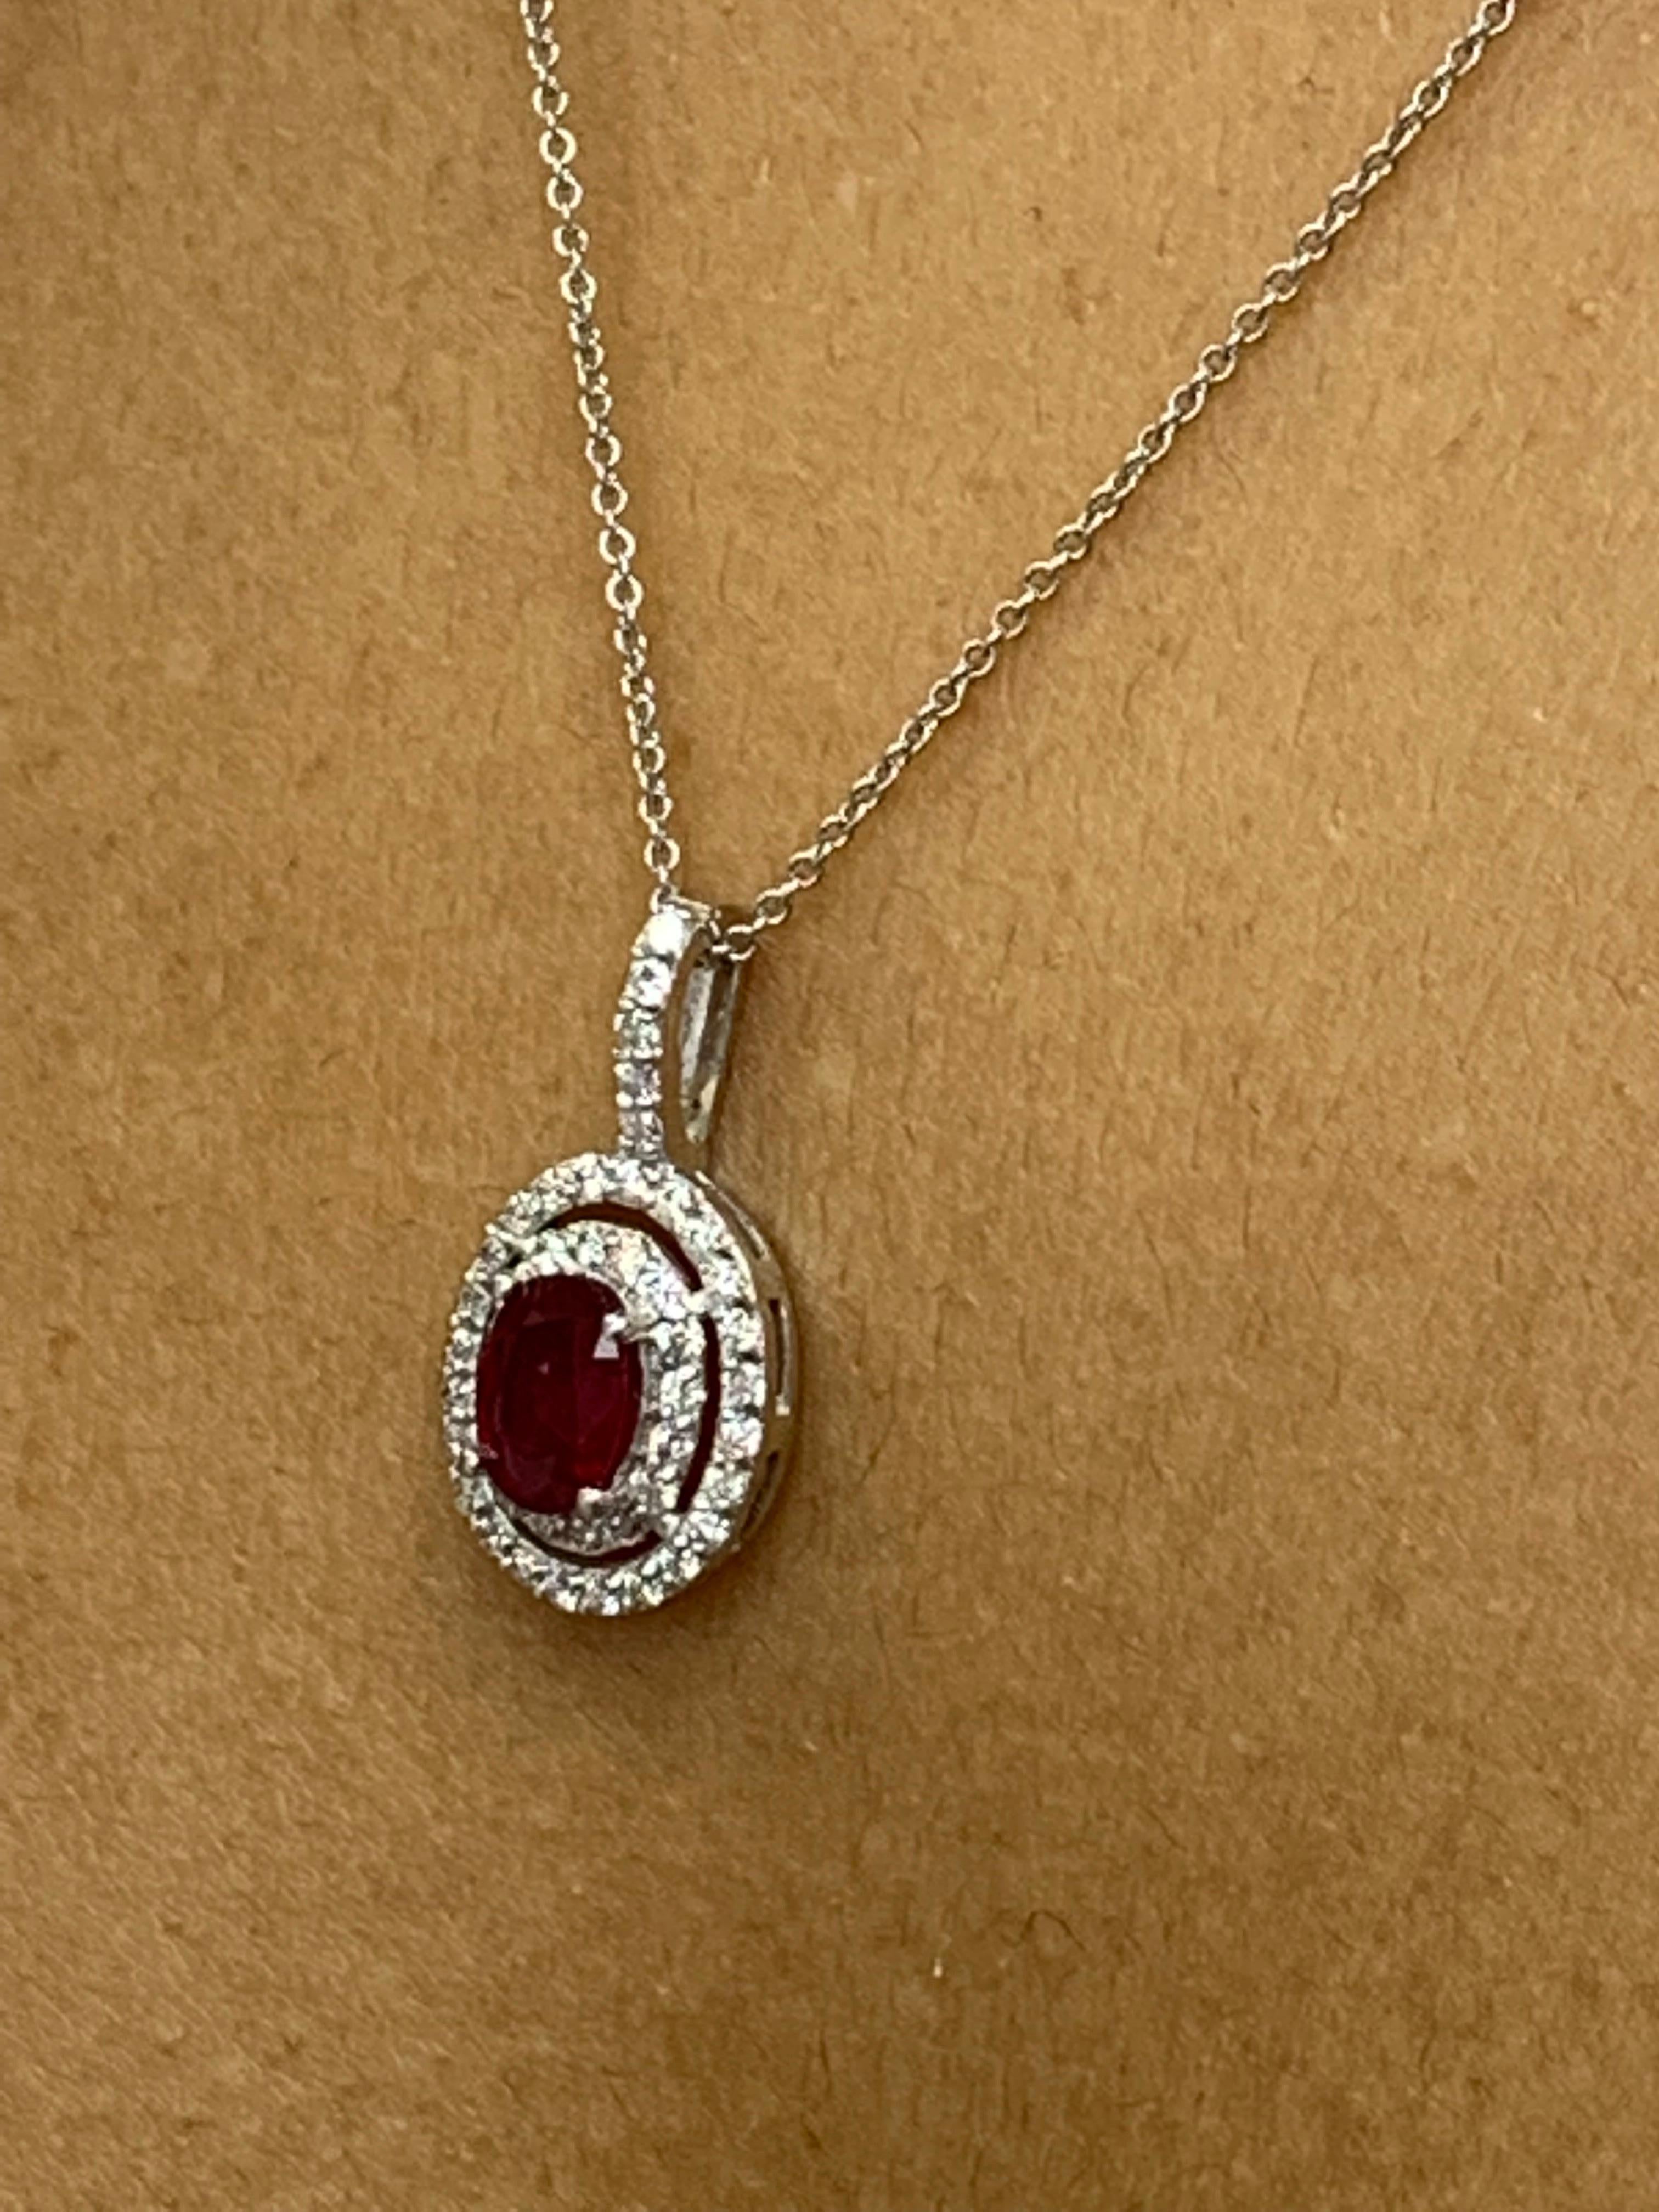 Grandeur 0.81 Carat Oval Cut Ruby and Diamond Pendant in 14K White Gold For Sale 6